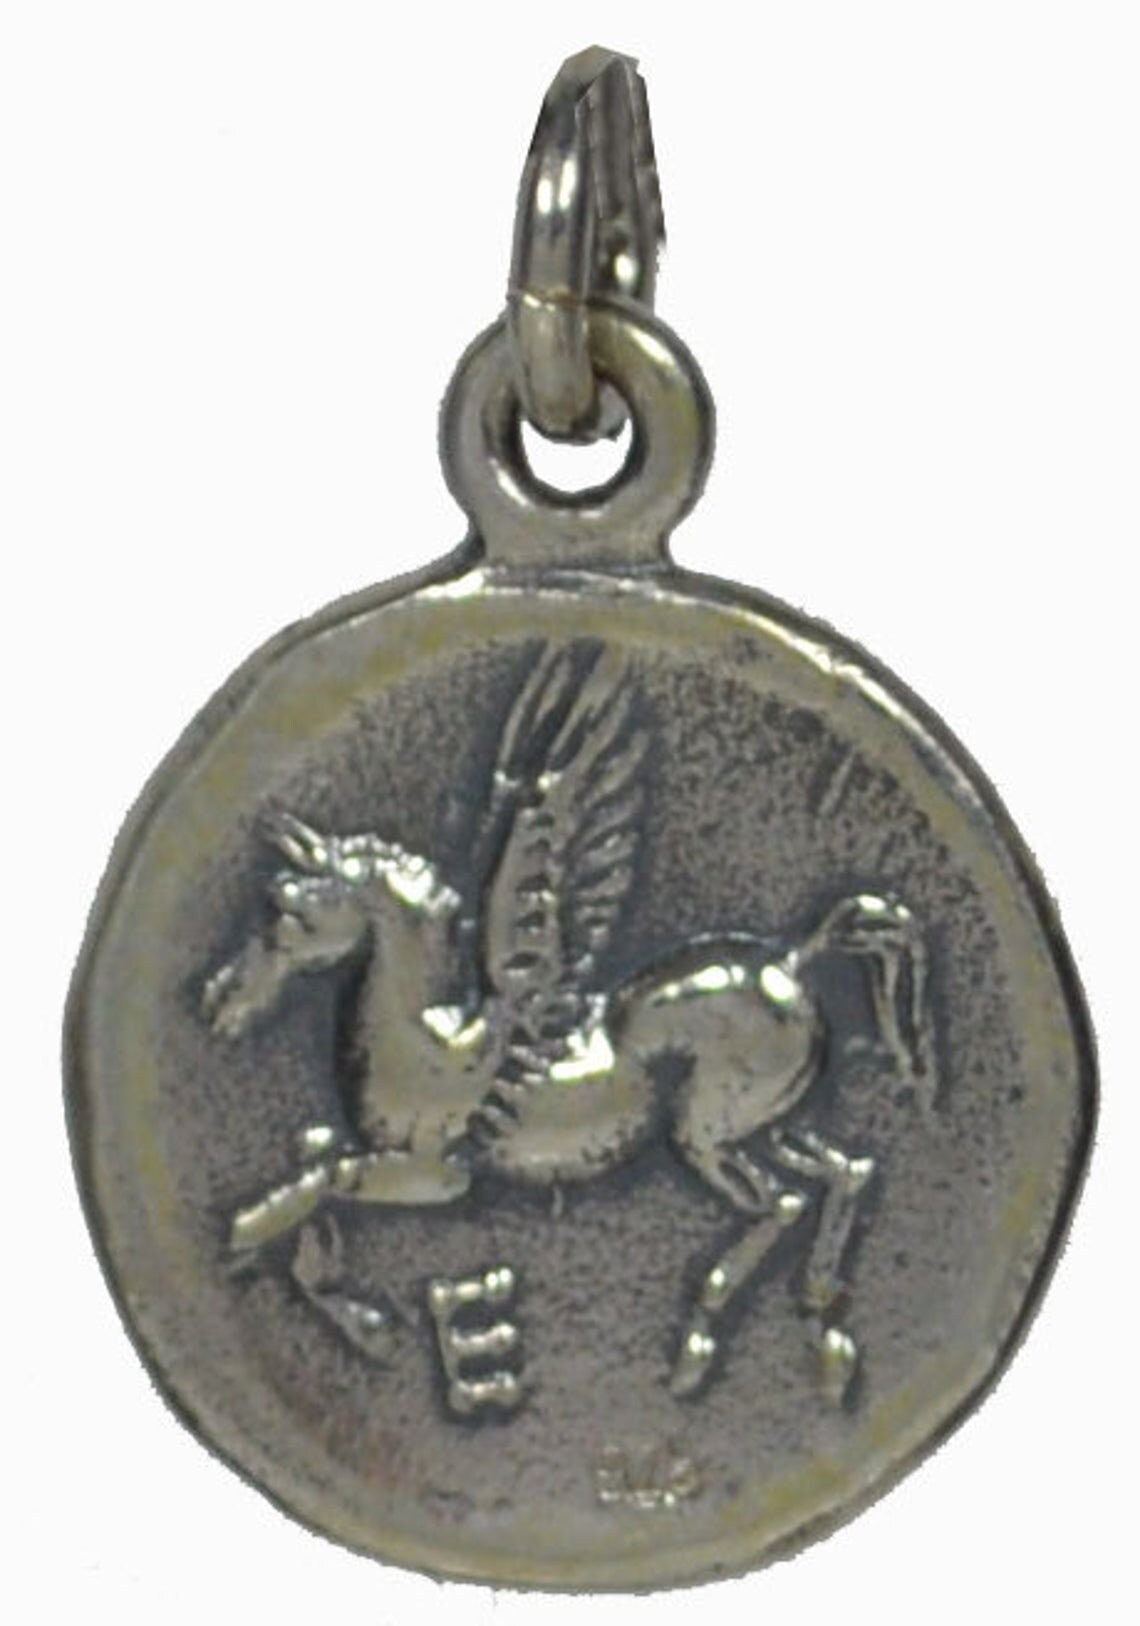 Artemis Diana, Greek Roman Goddess of hunting - Pegasus, mythical winged divine horse -  Coin Pendant - 925 Sterling Silver